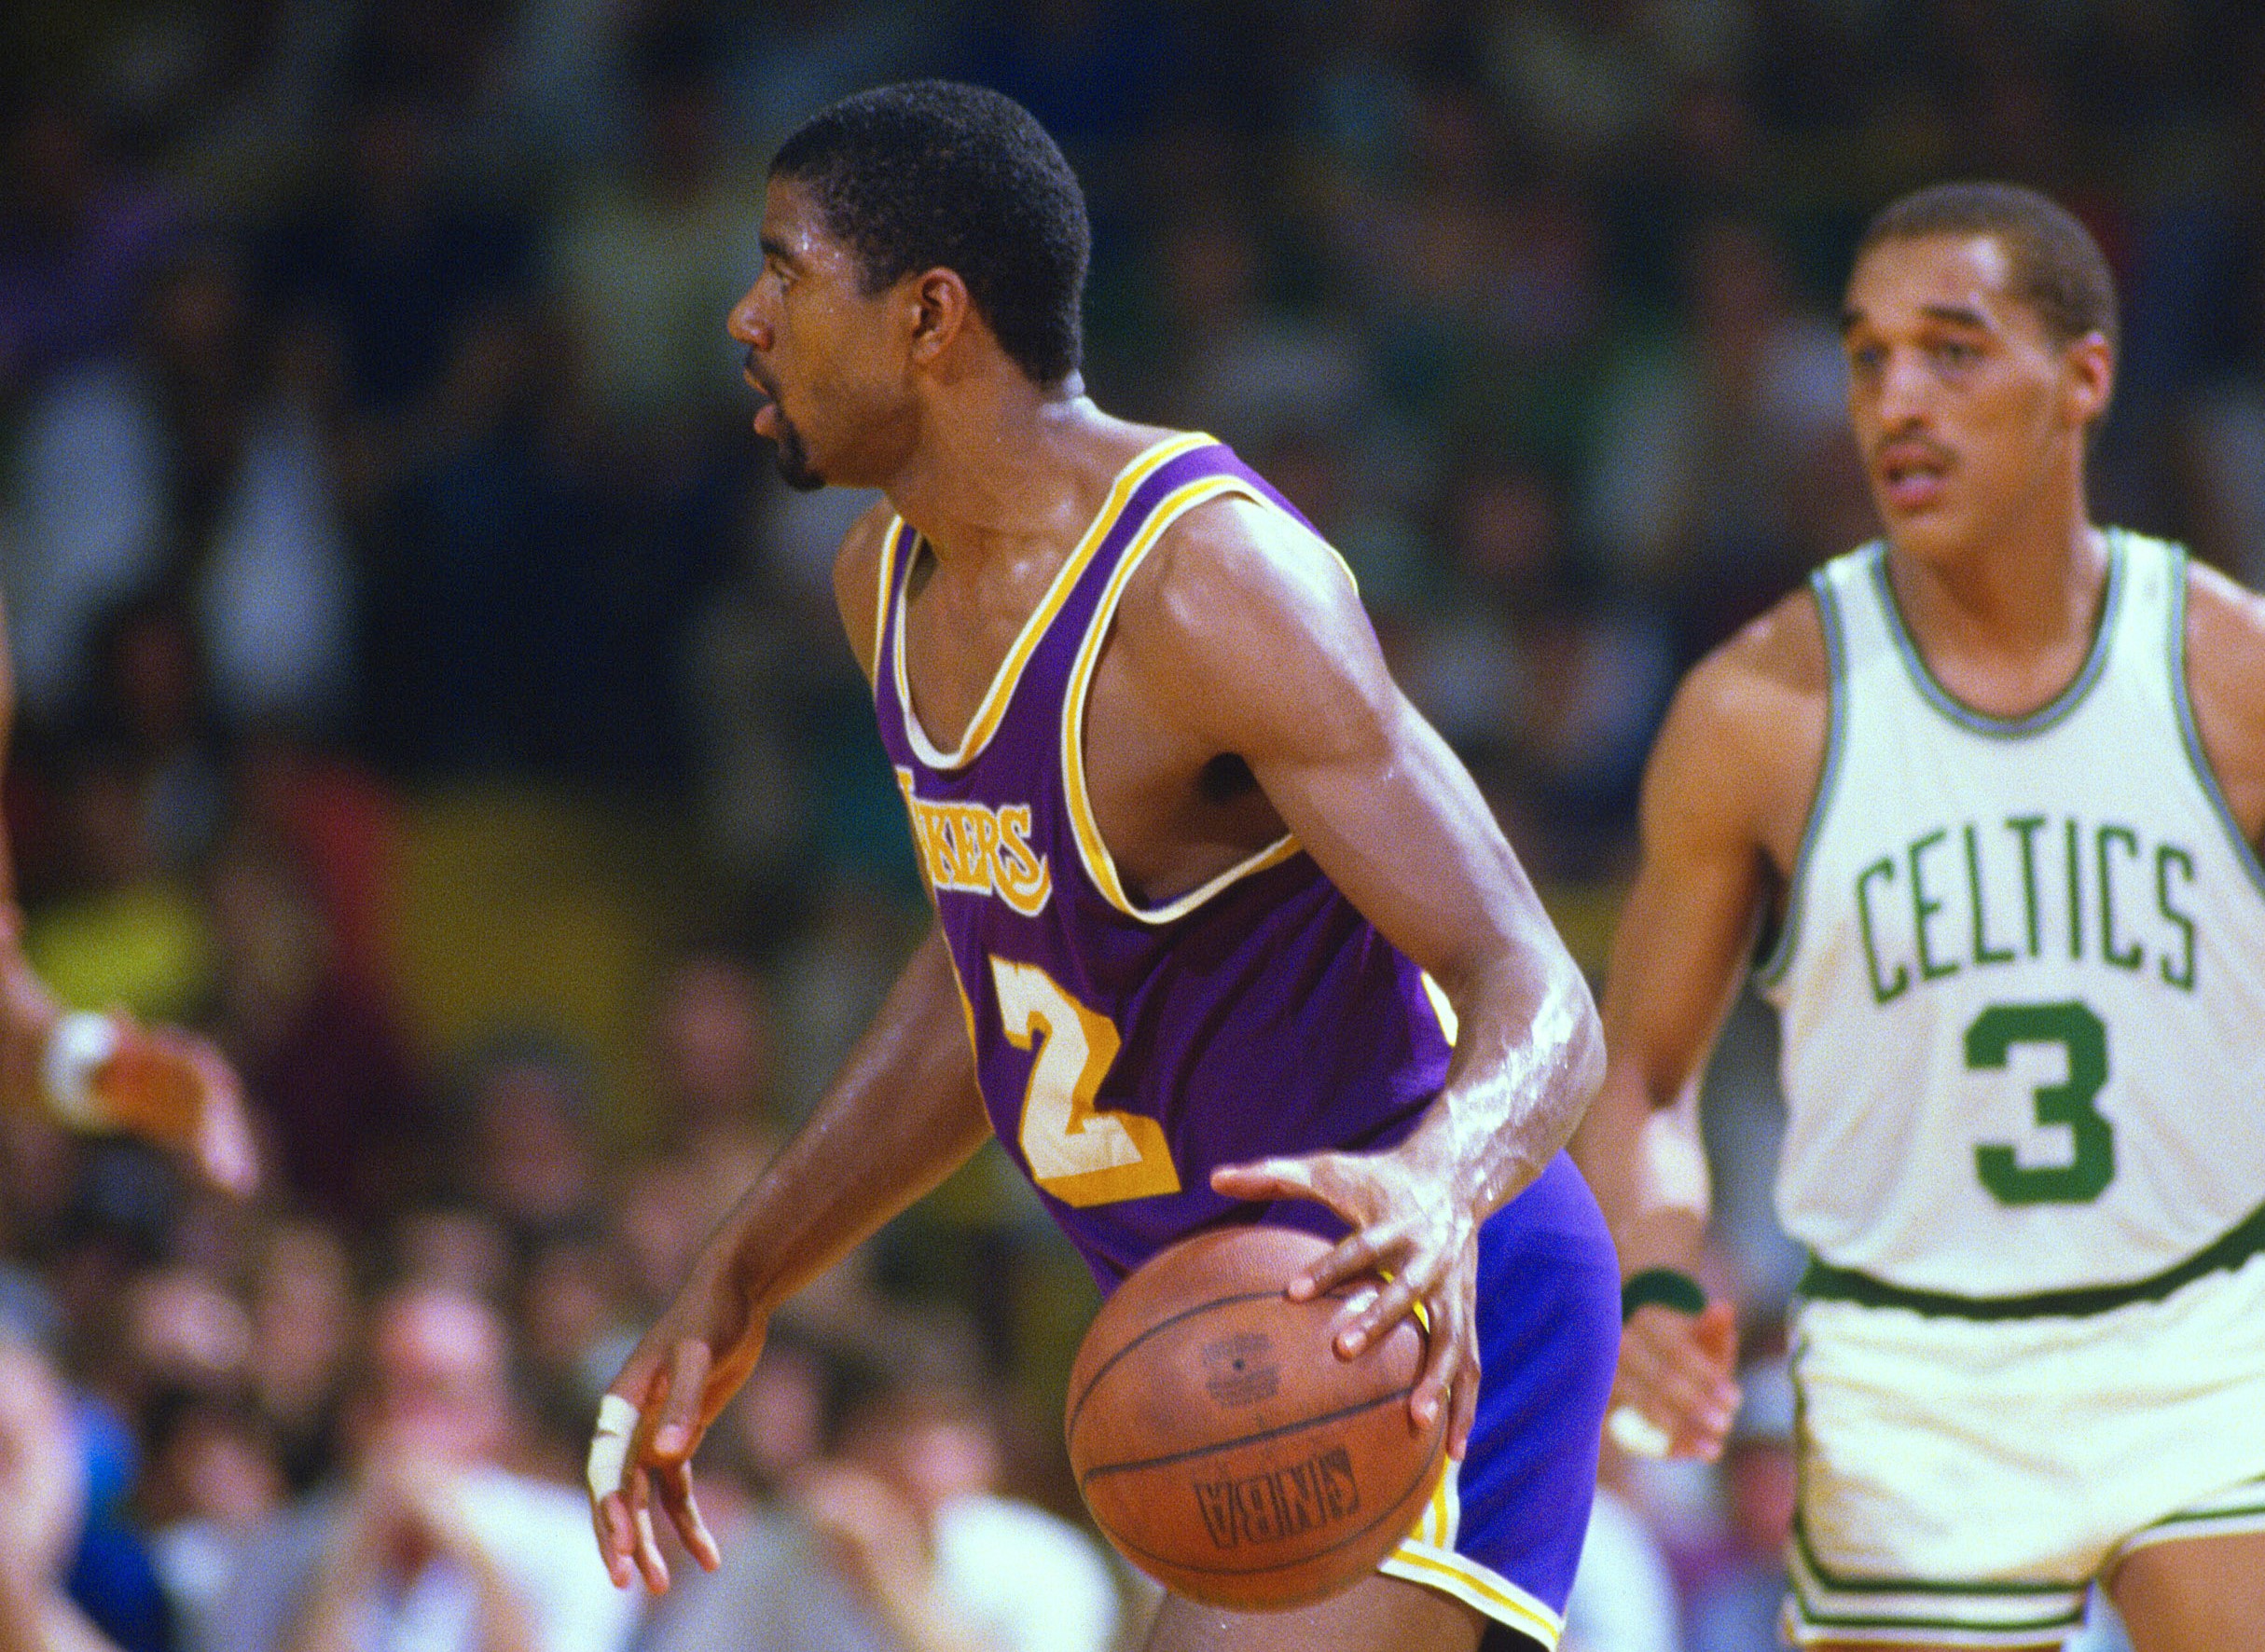 Magic Johnson of the Los Angeles Lakers makes a no-look pass